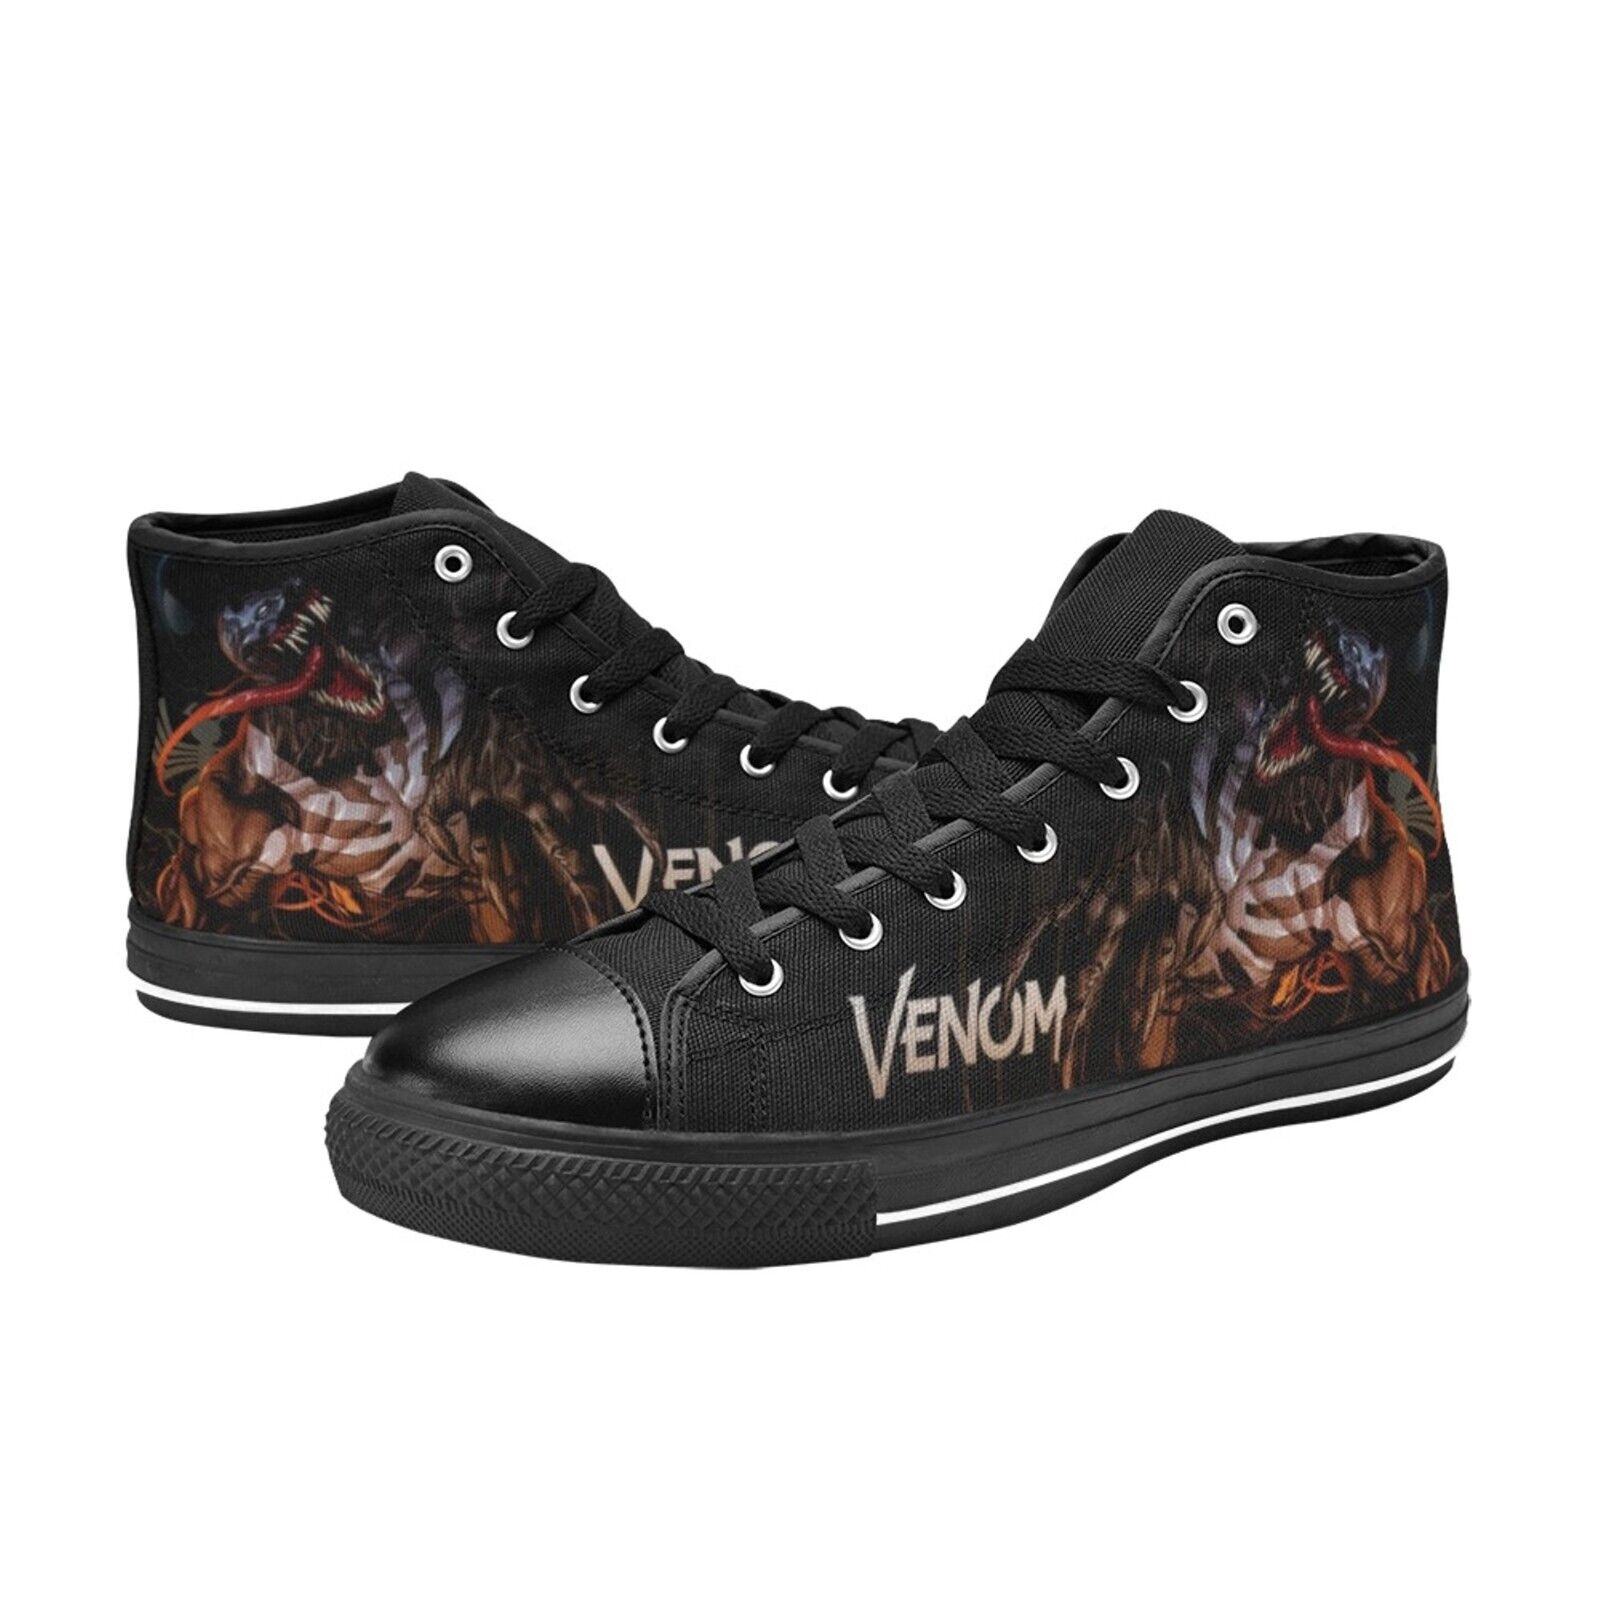 Discover Venom High Top Sneakers